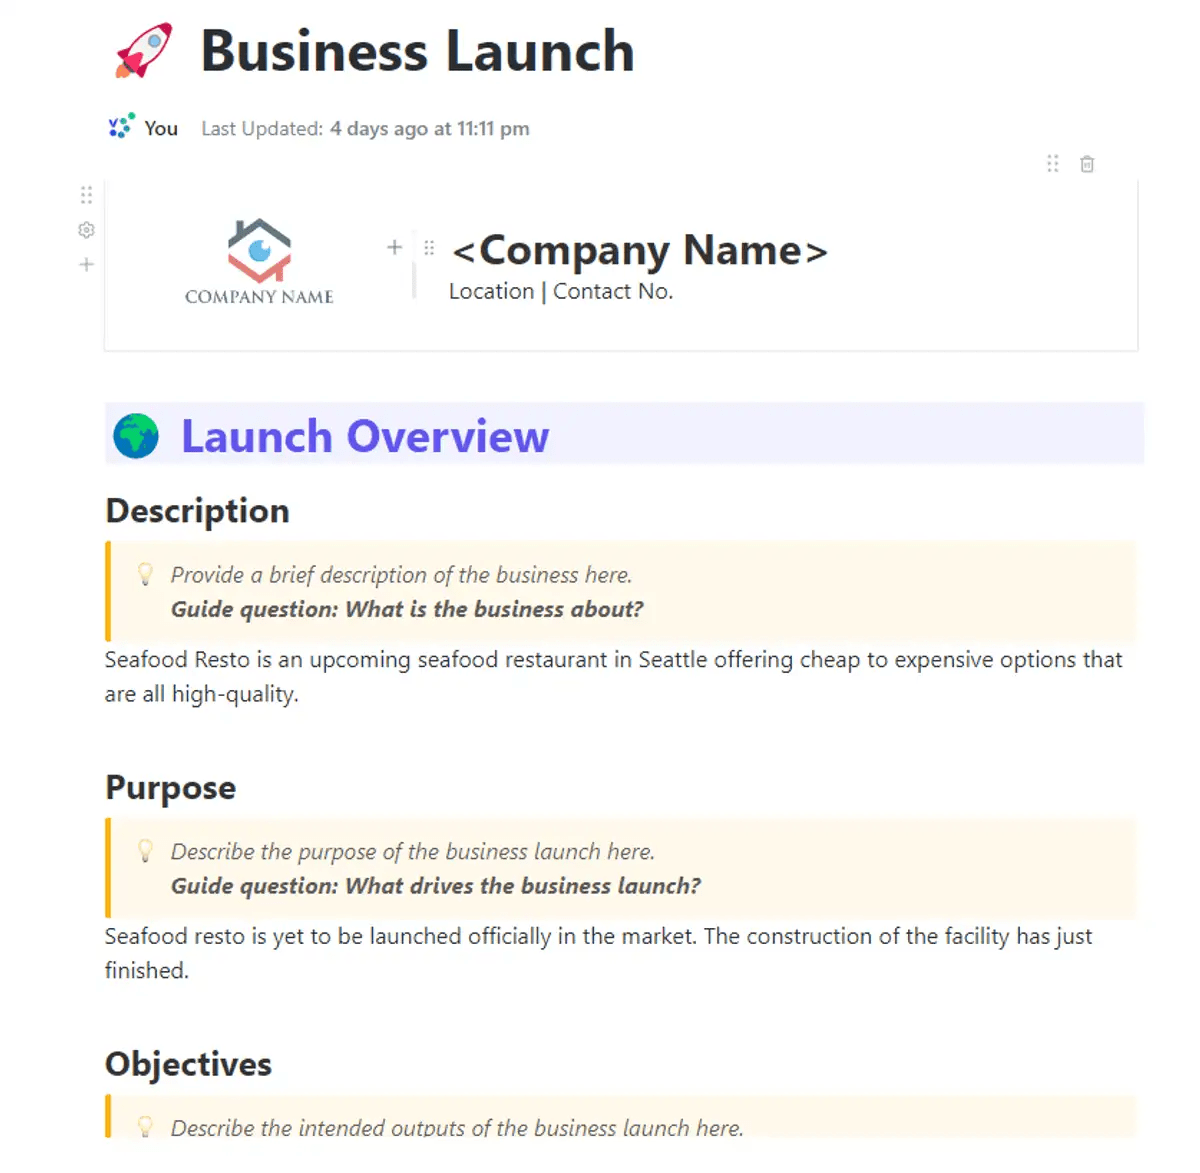 ClickUp's Business Launch Template is designed to help you plan, organize, and track your business launch. 